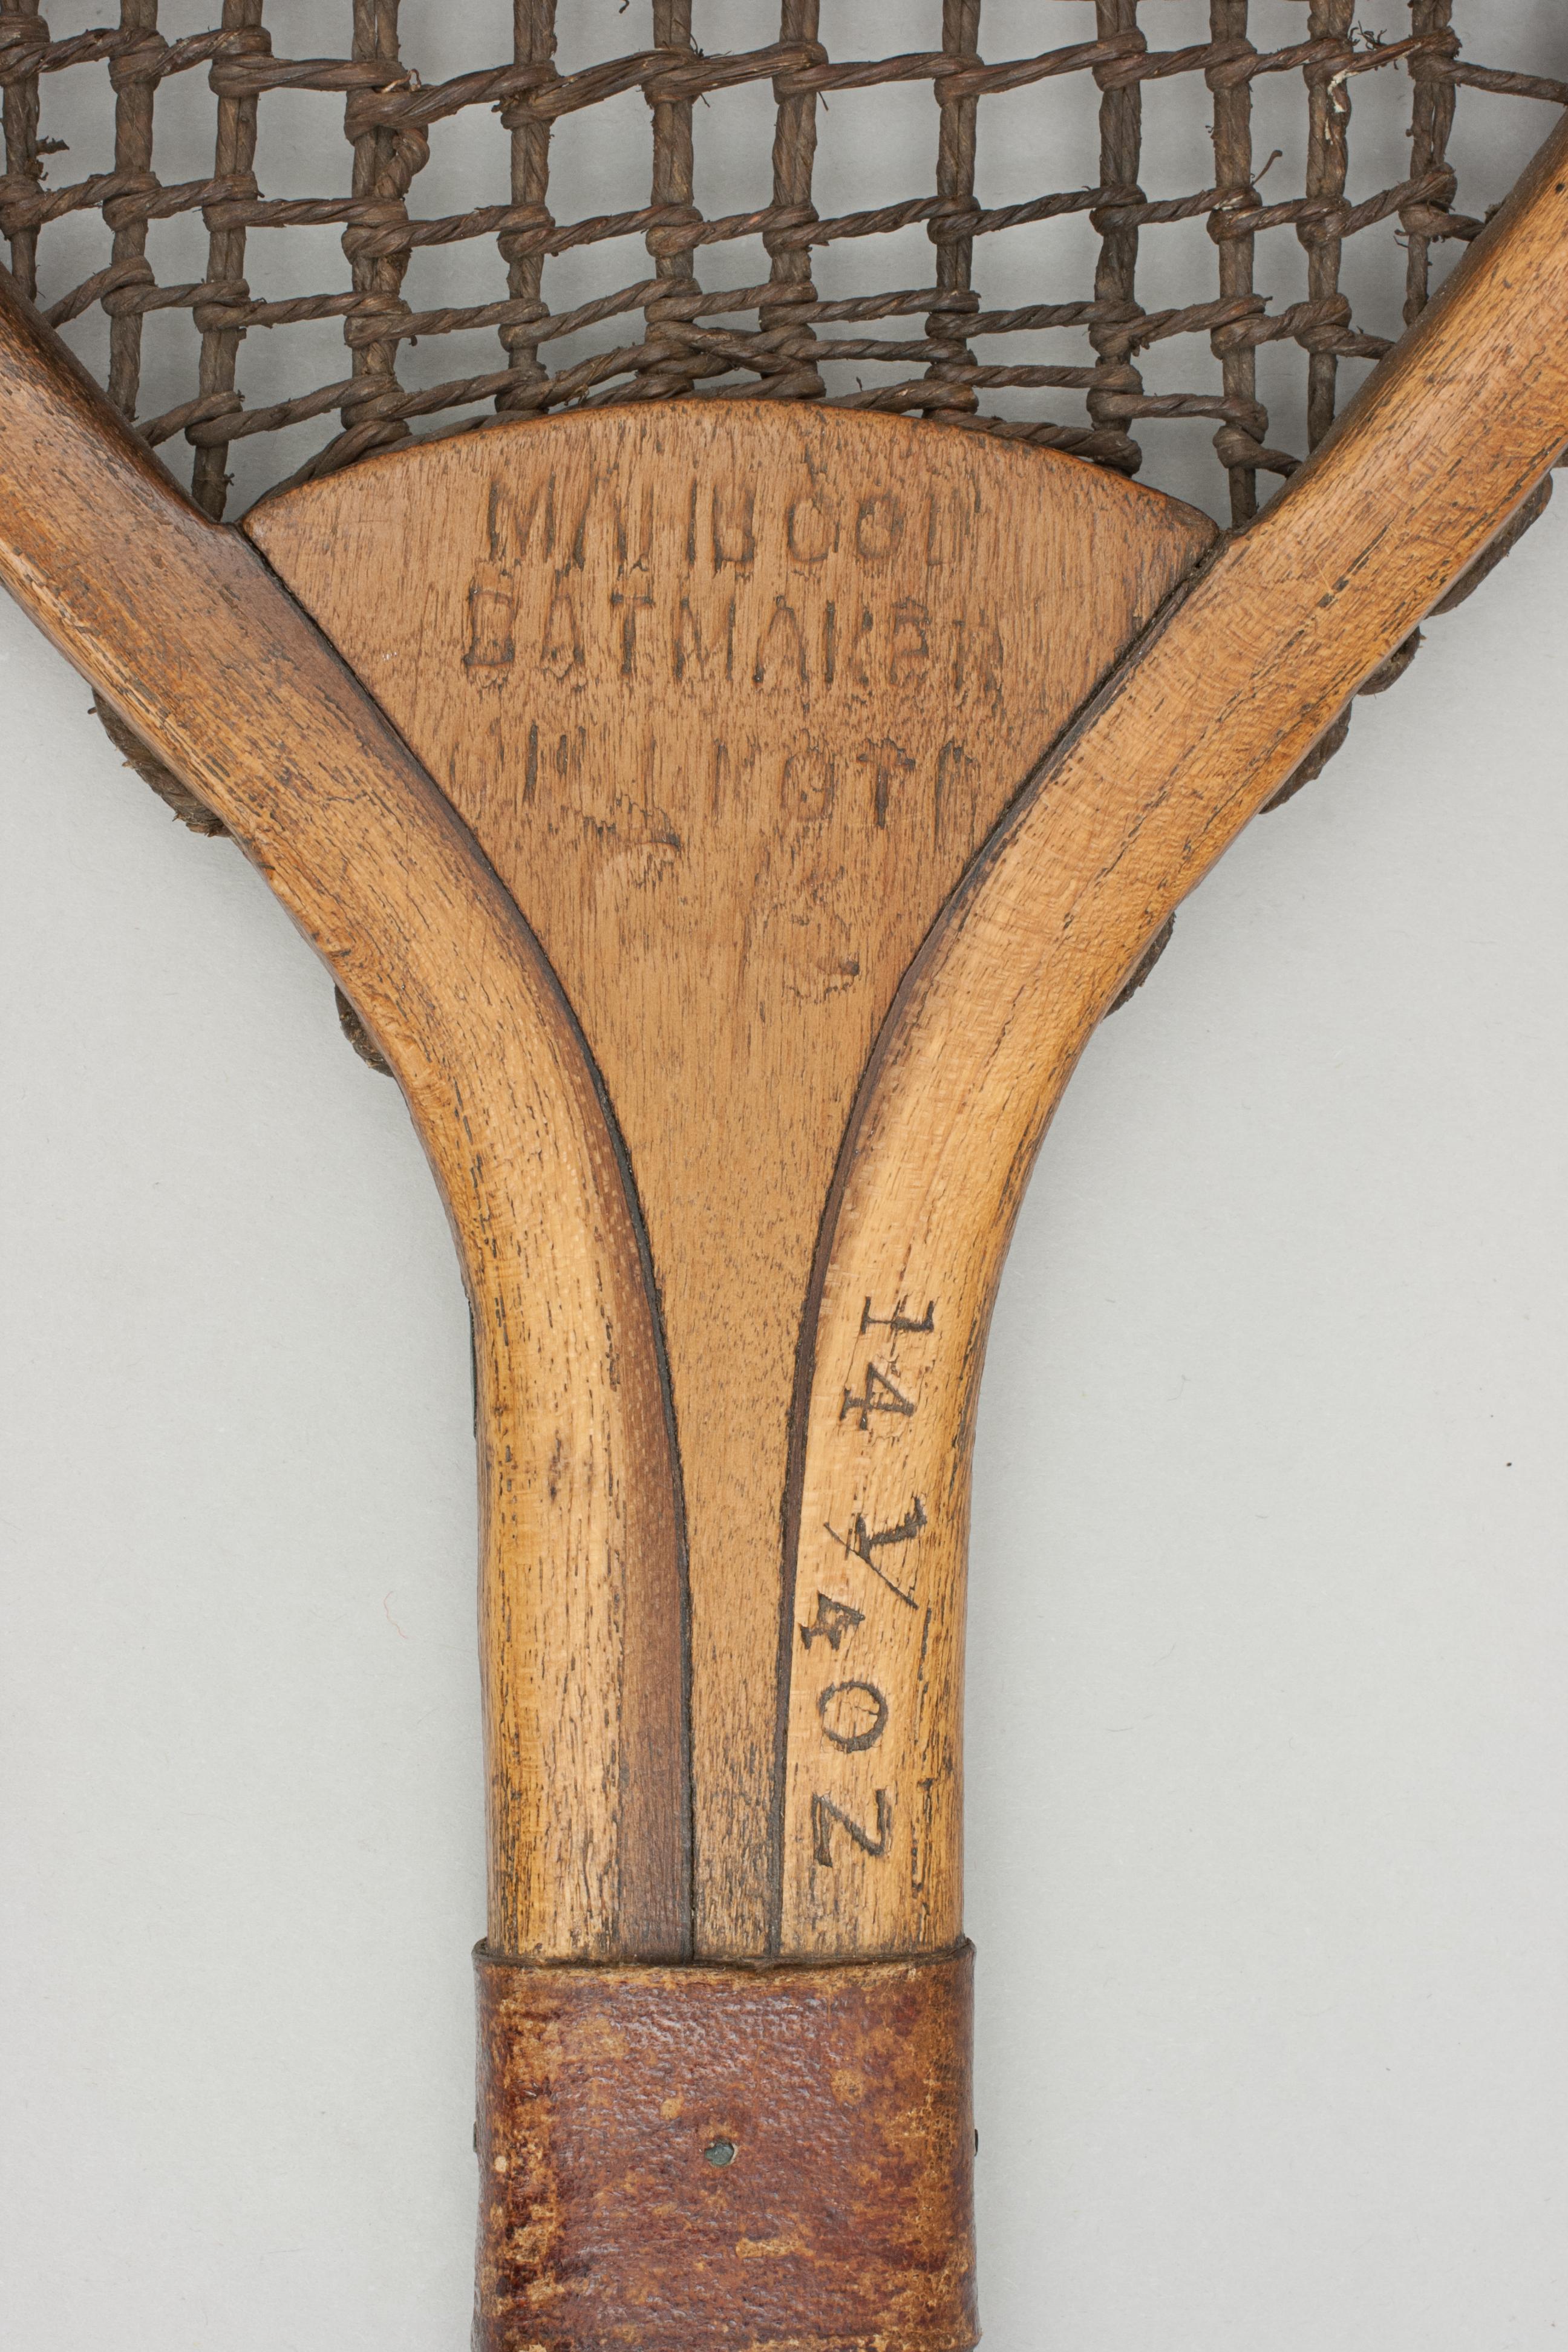 A fine example of a flat top lawn tennis racket by Mahboob of Sialkot (Punjab). The racket has good, original double stringing, 11 trebling to the top and none at the bottom. Not only is it unusual for its bulbous shaped handle with diamond shape